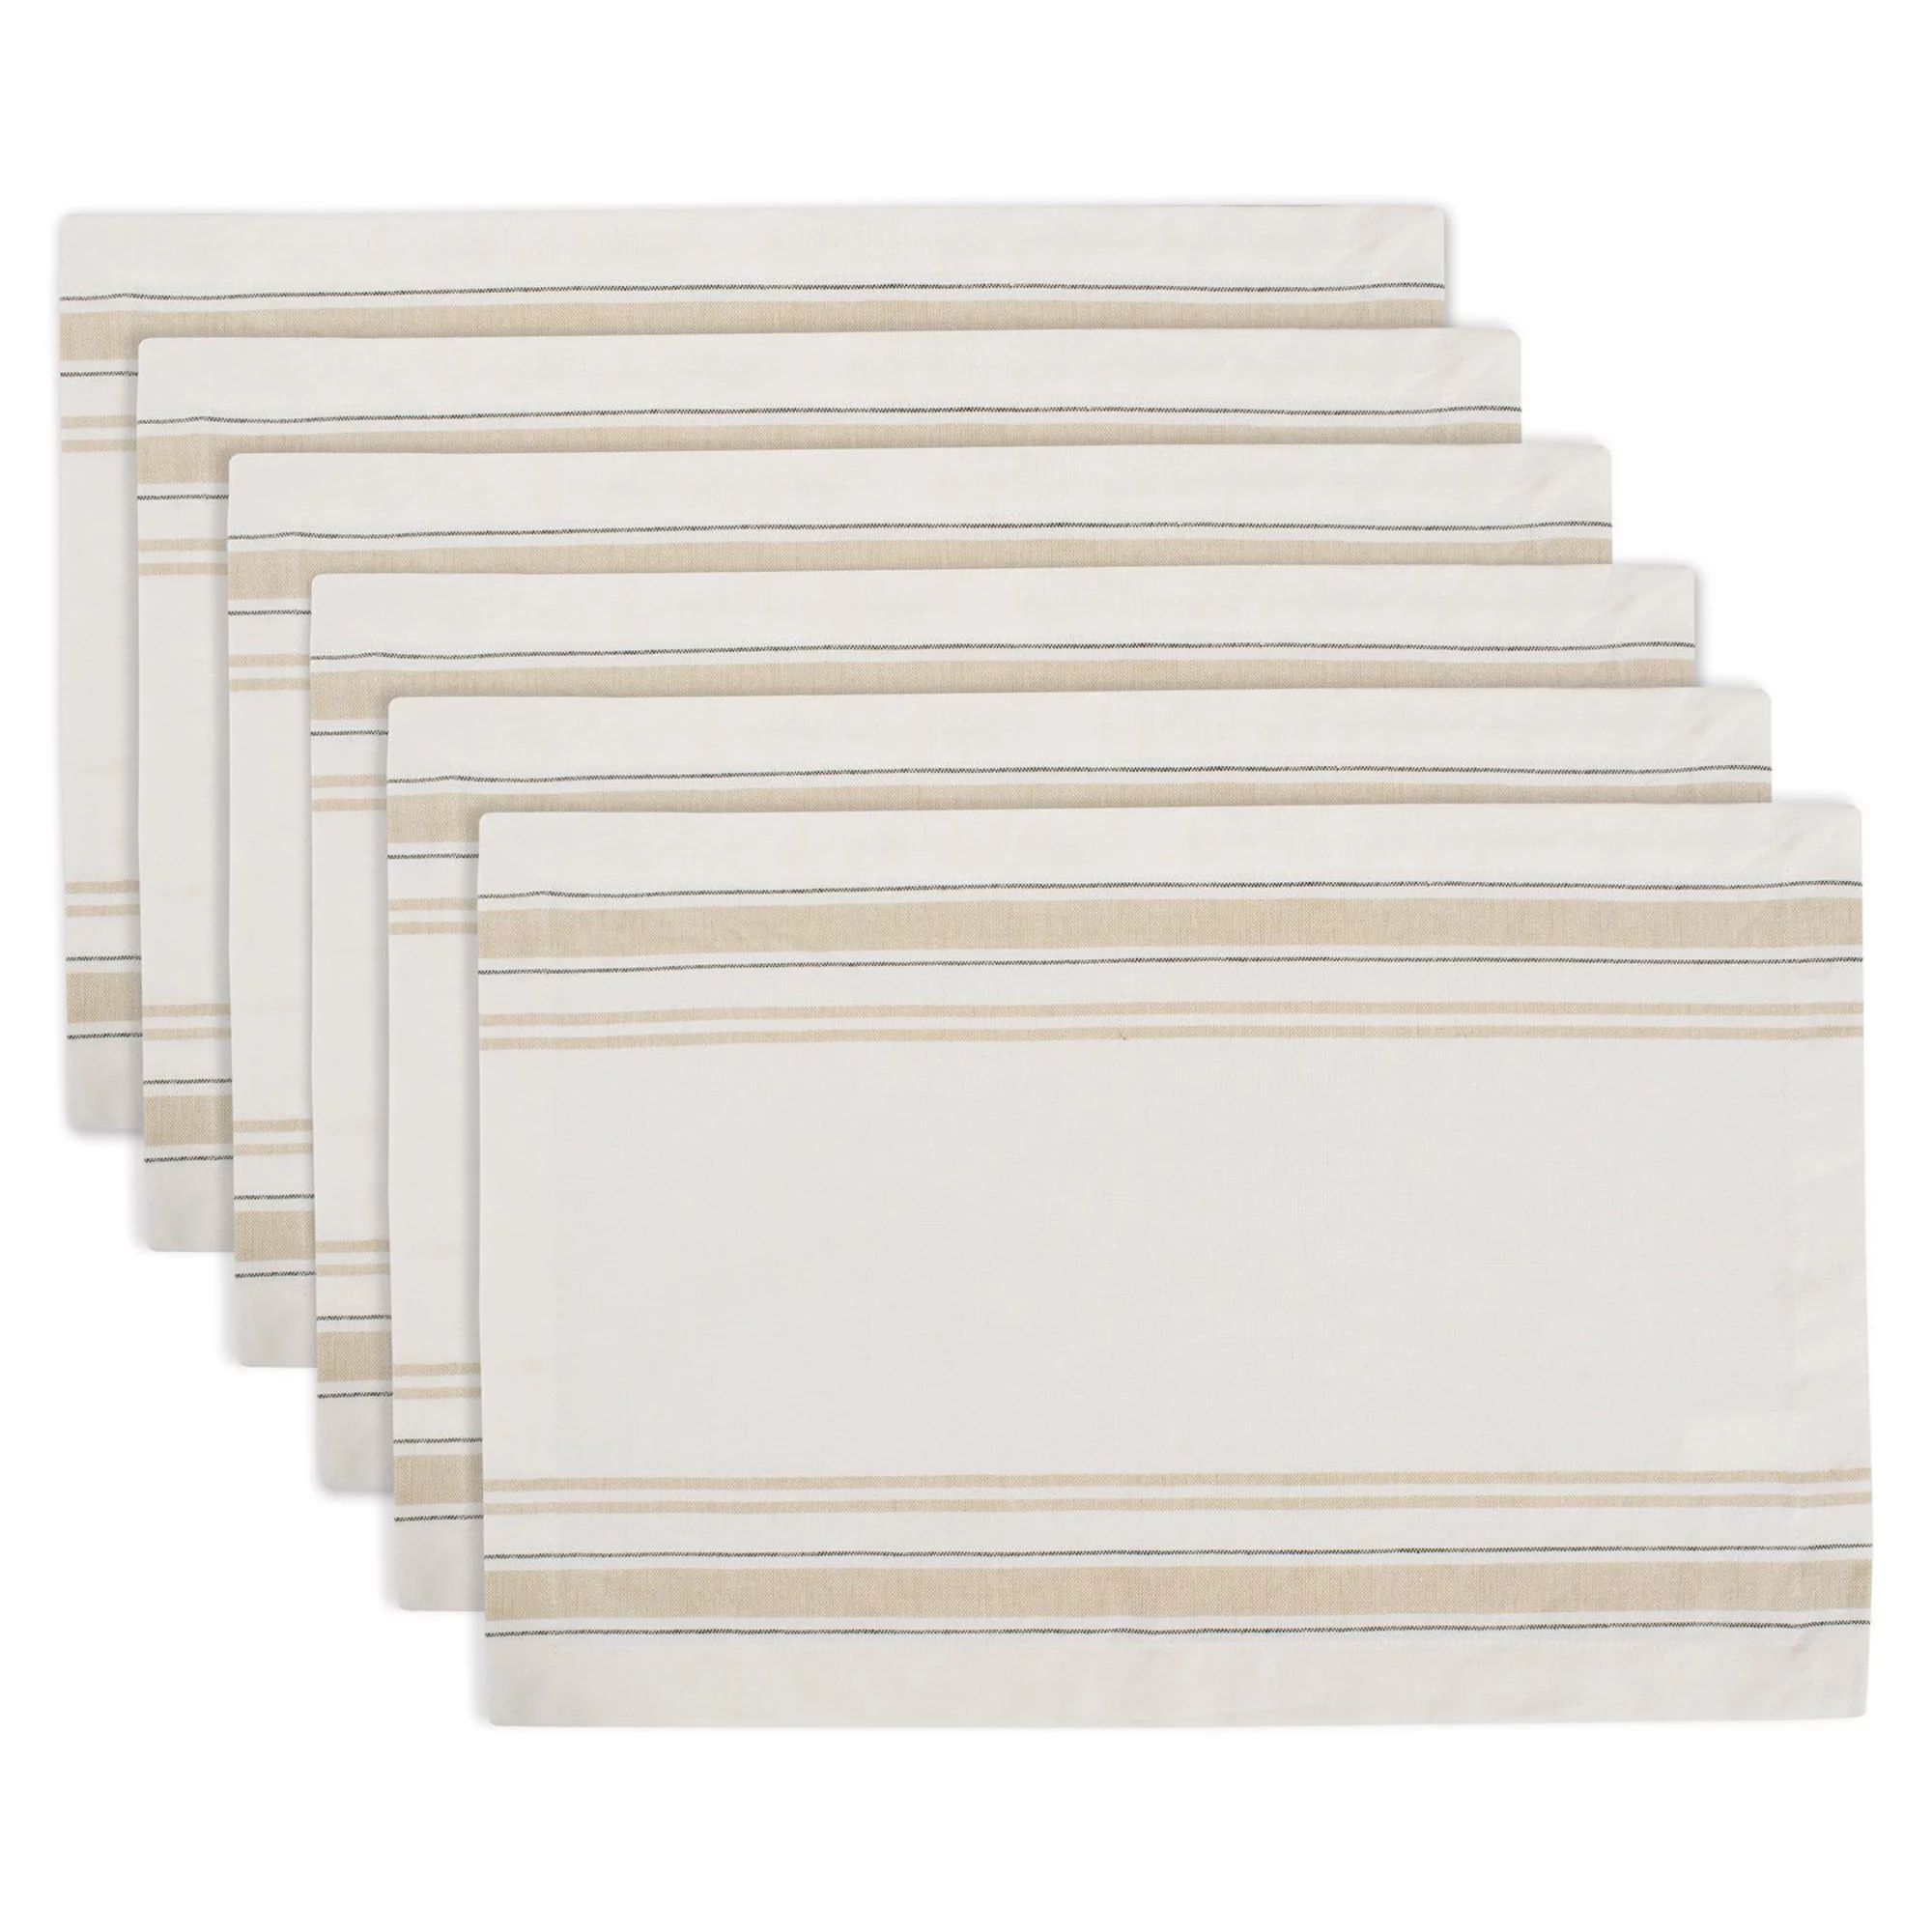 Set of 6 White Chambray and Brown French Stripe Rectangular Placemats 19" x 13" | Walmart (US)